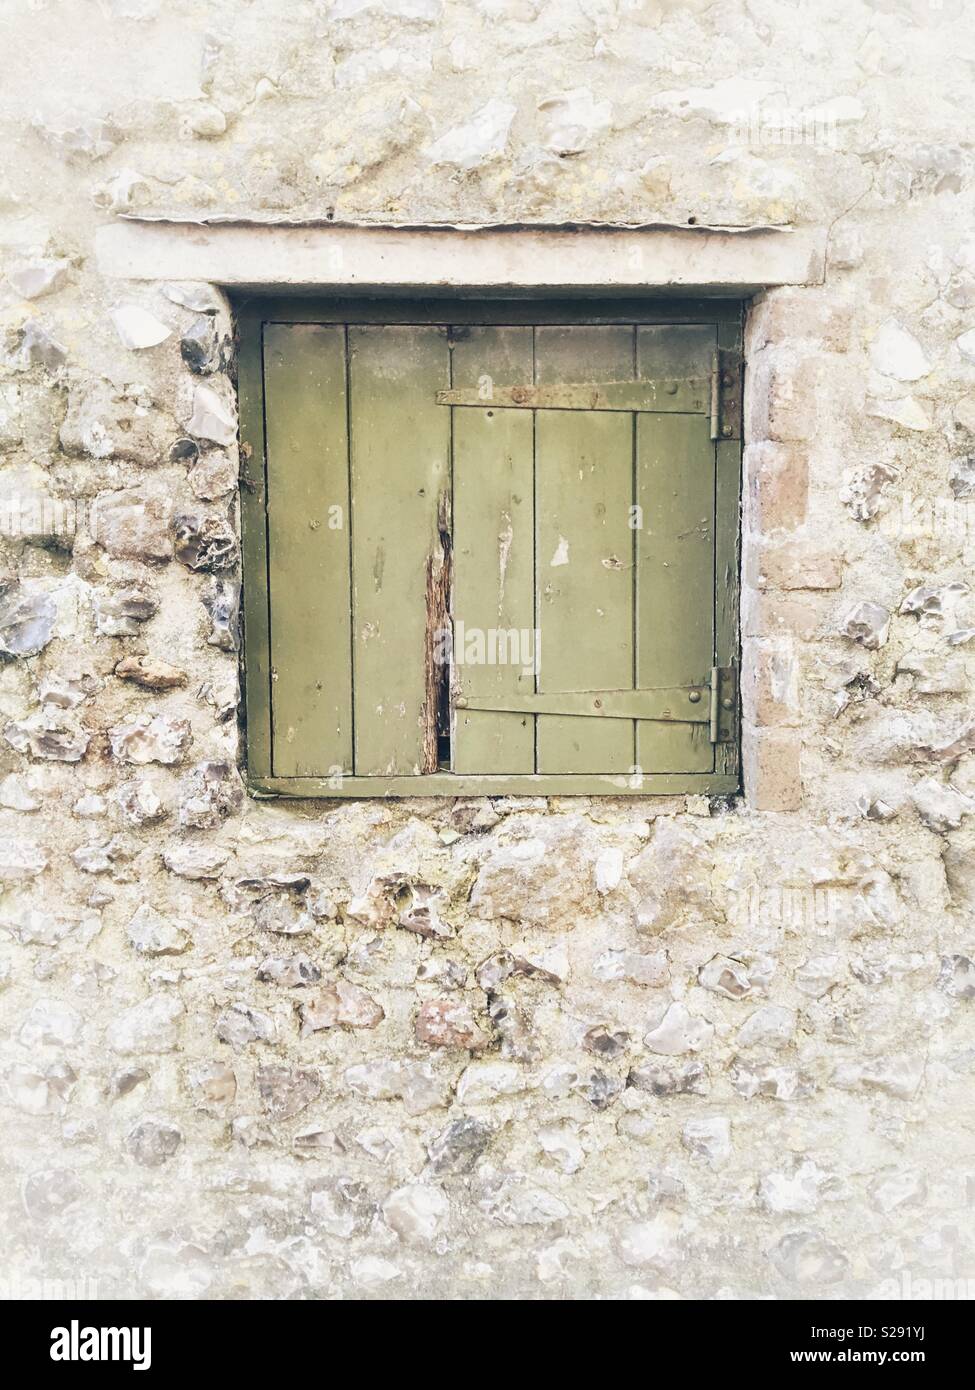 https://c8.alamy.com/comp/S291YJ/small-window-with-green-painted-wood-shutter-in-a-stone-wall-S291YJ.jpg